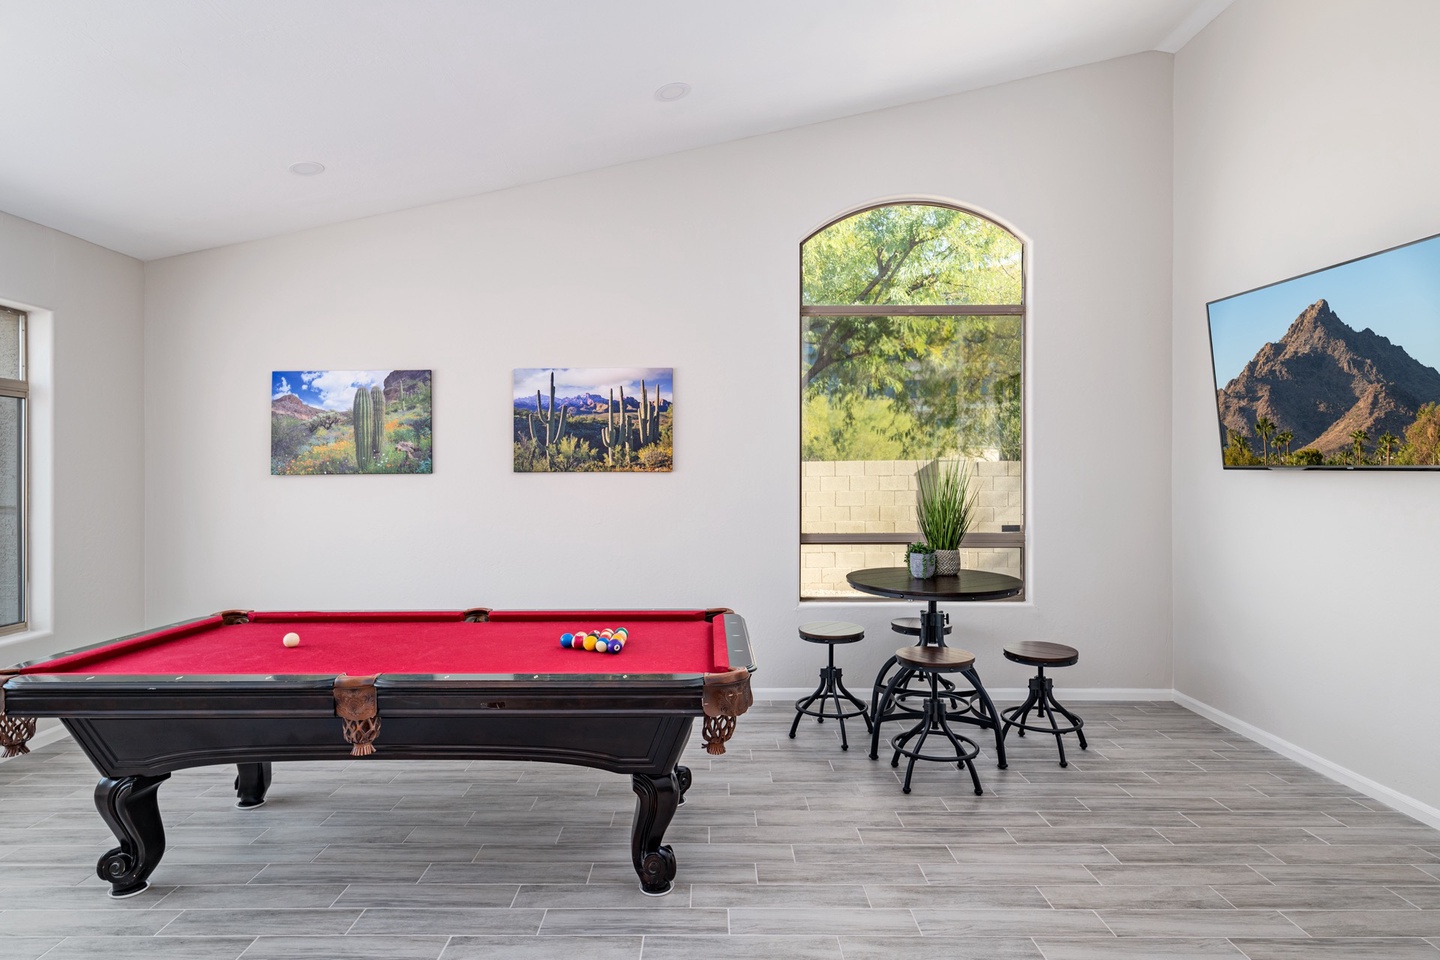 Family room set up with a billiards table